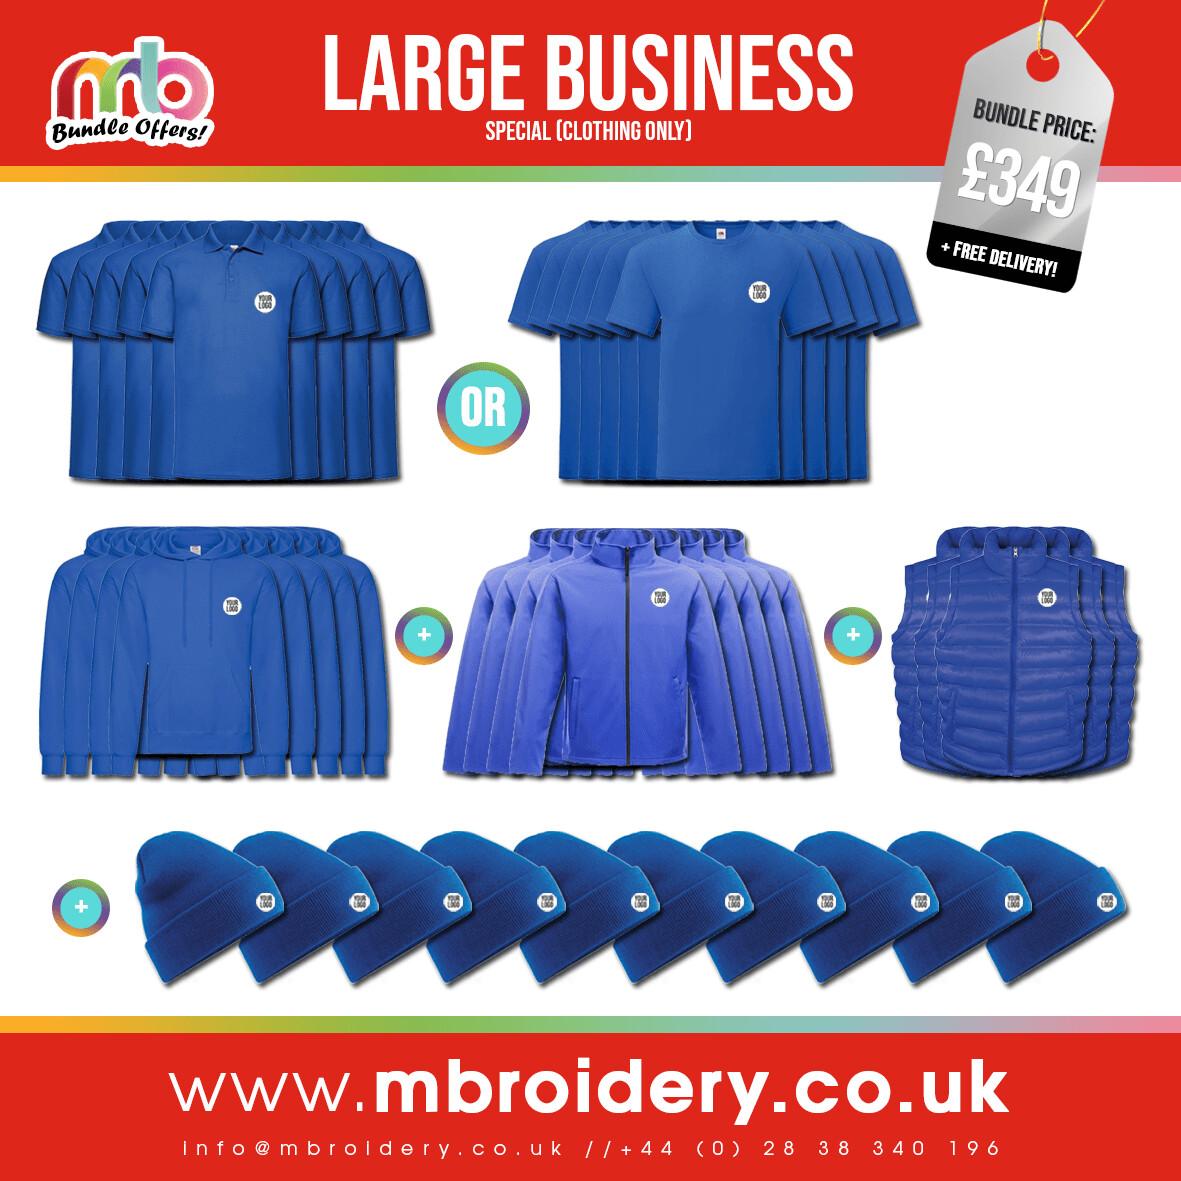 Large Business Special (Clothing Only)